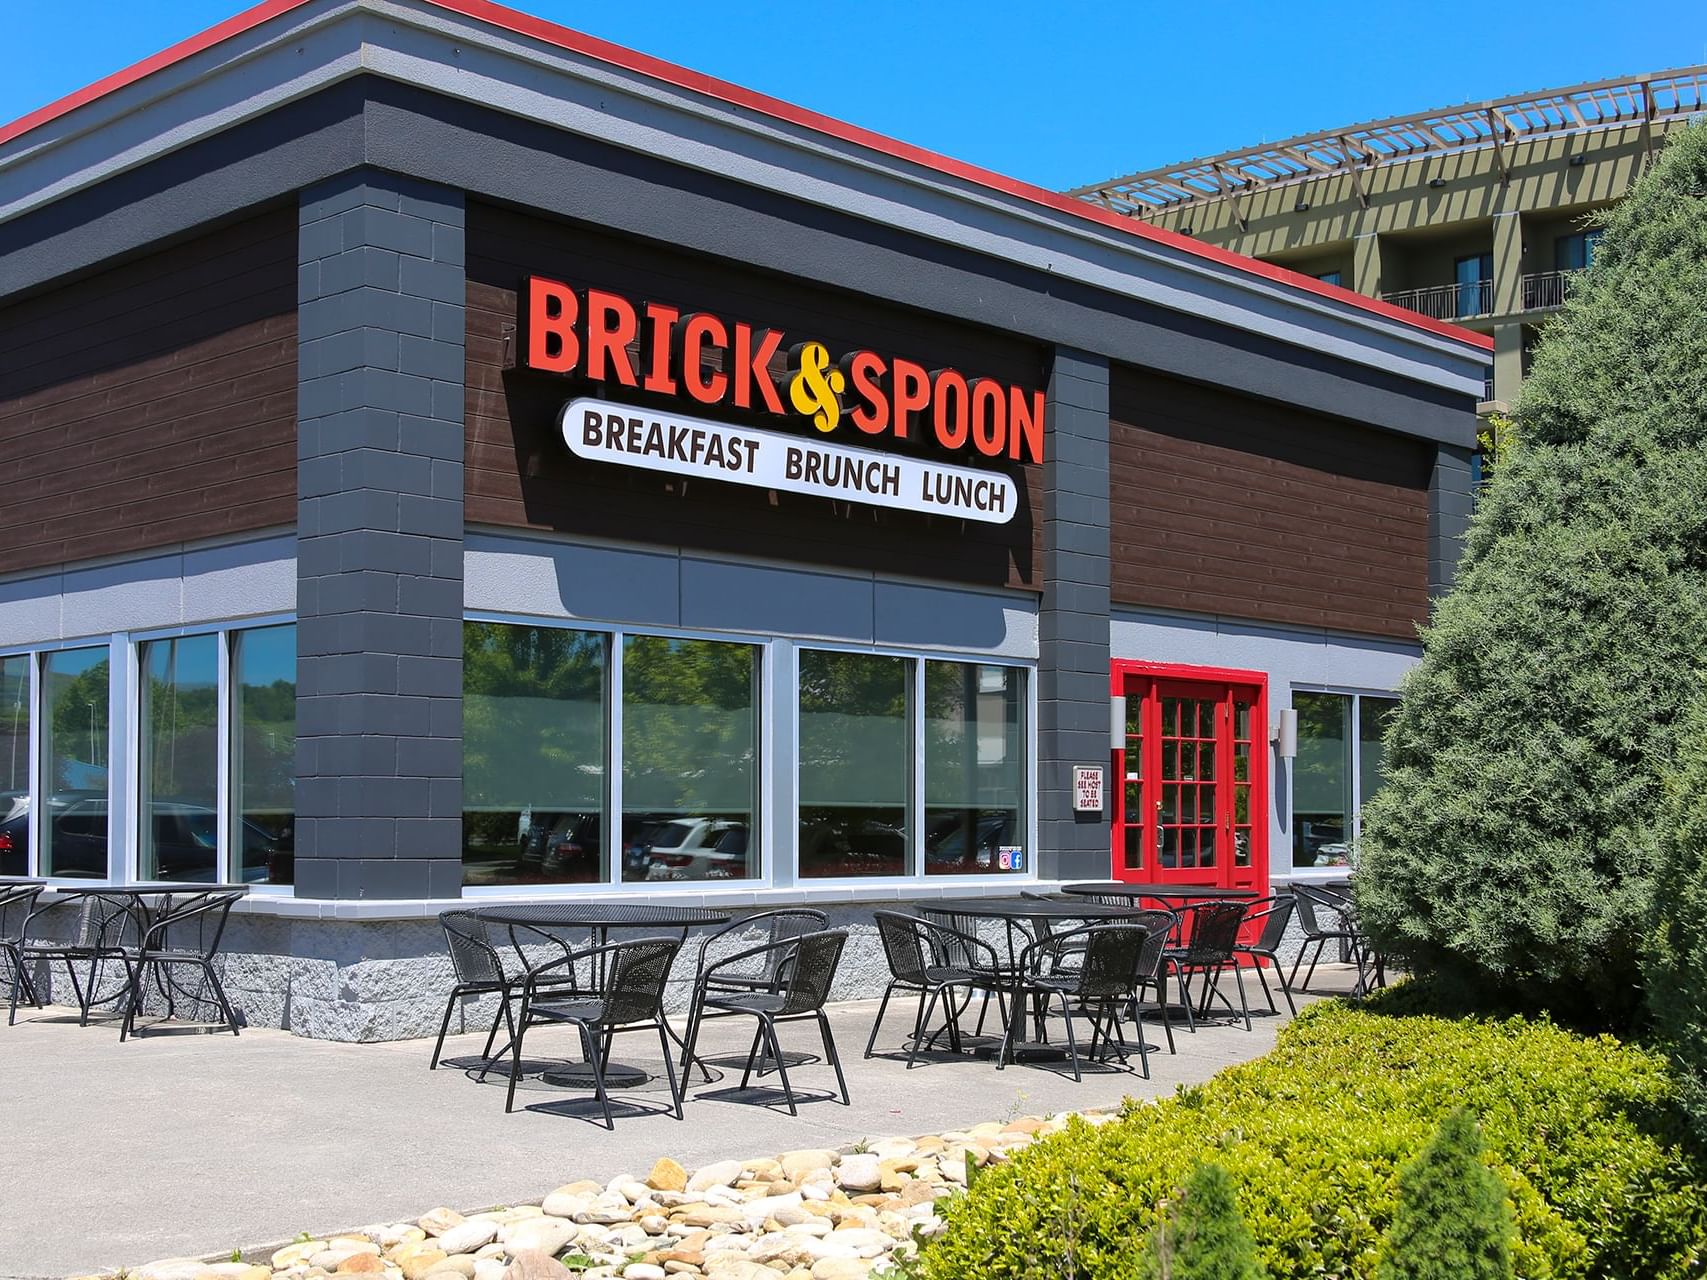 The Brick & Spoon in Pigeon Forge, TN